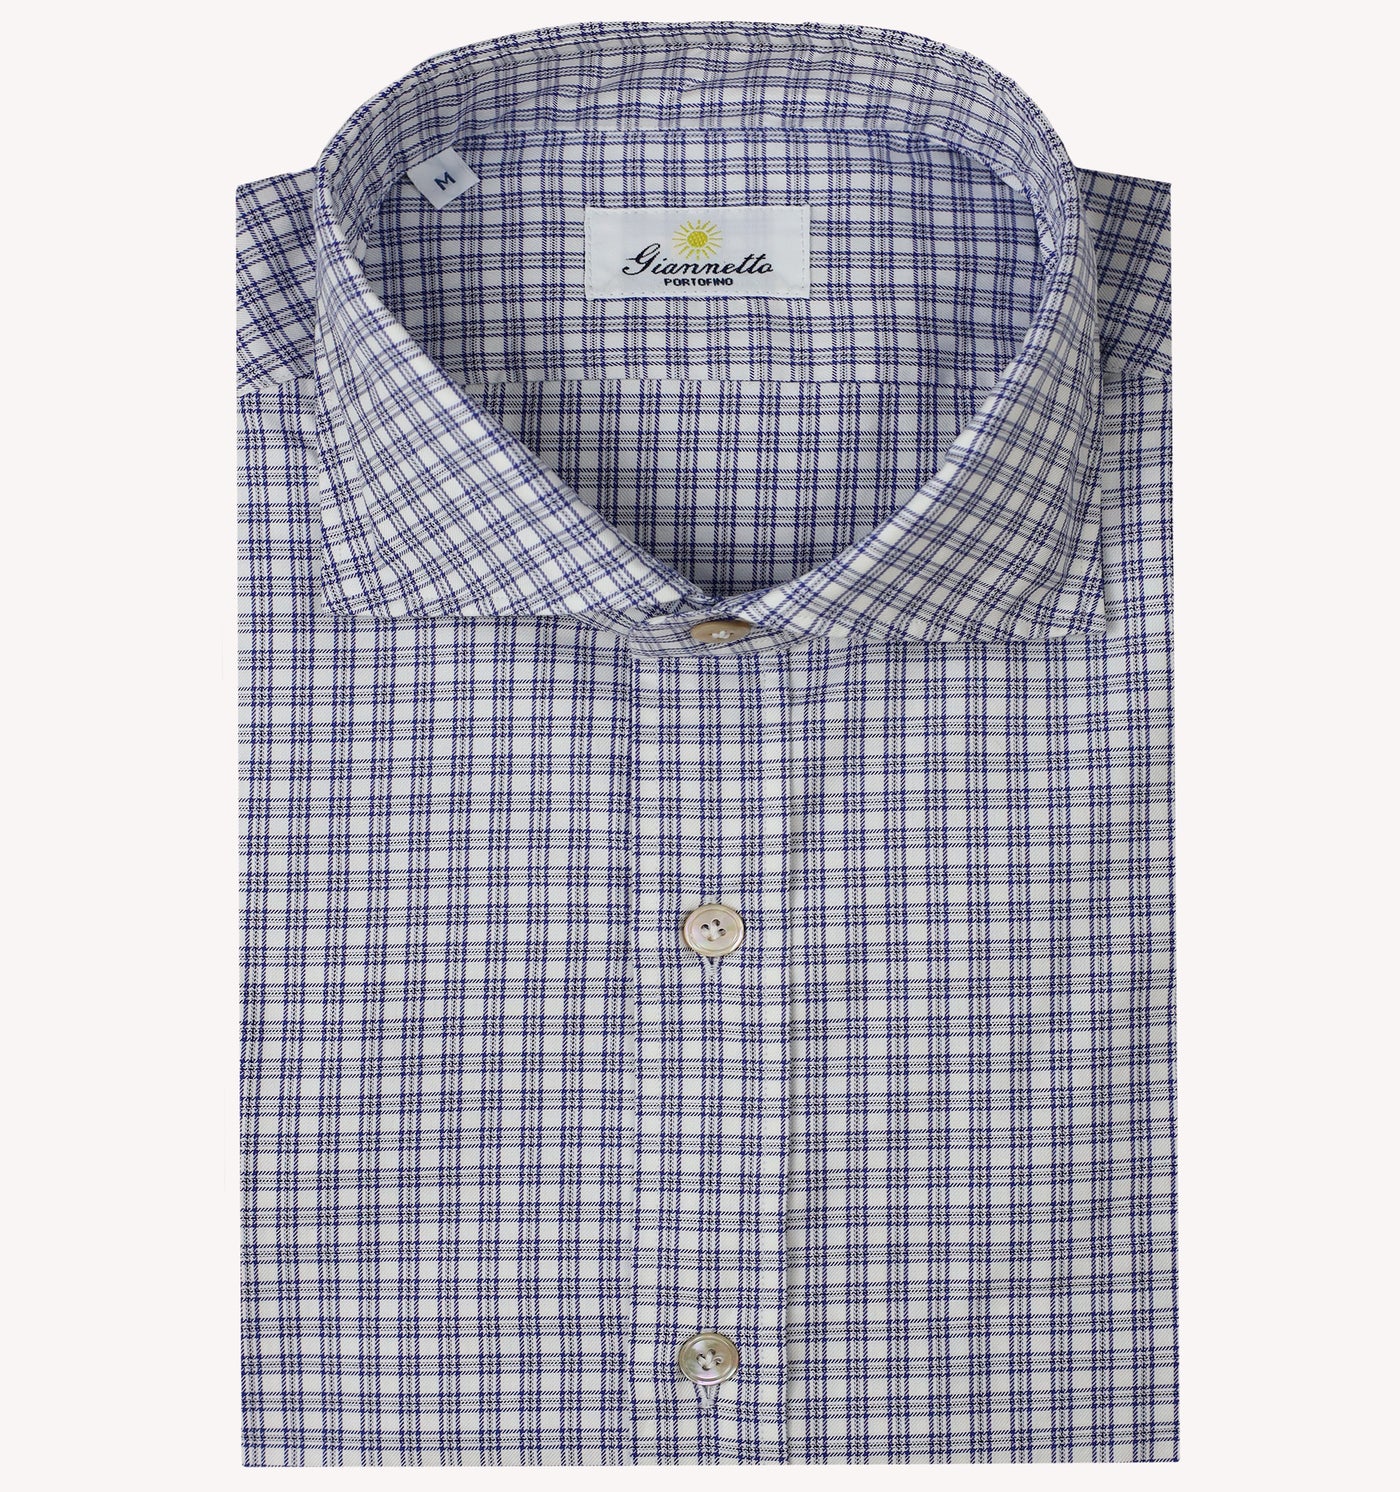 Giannetto Check Sport Shirt in Blue